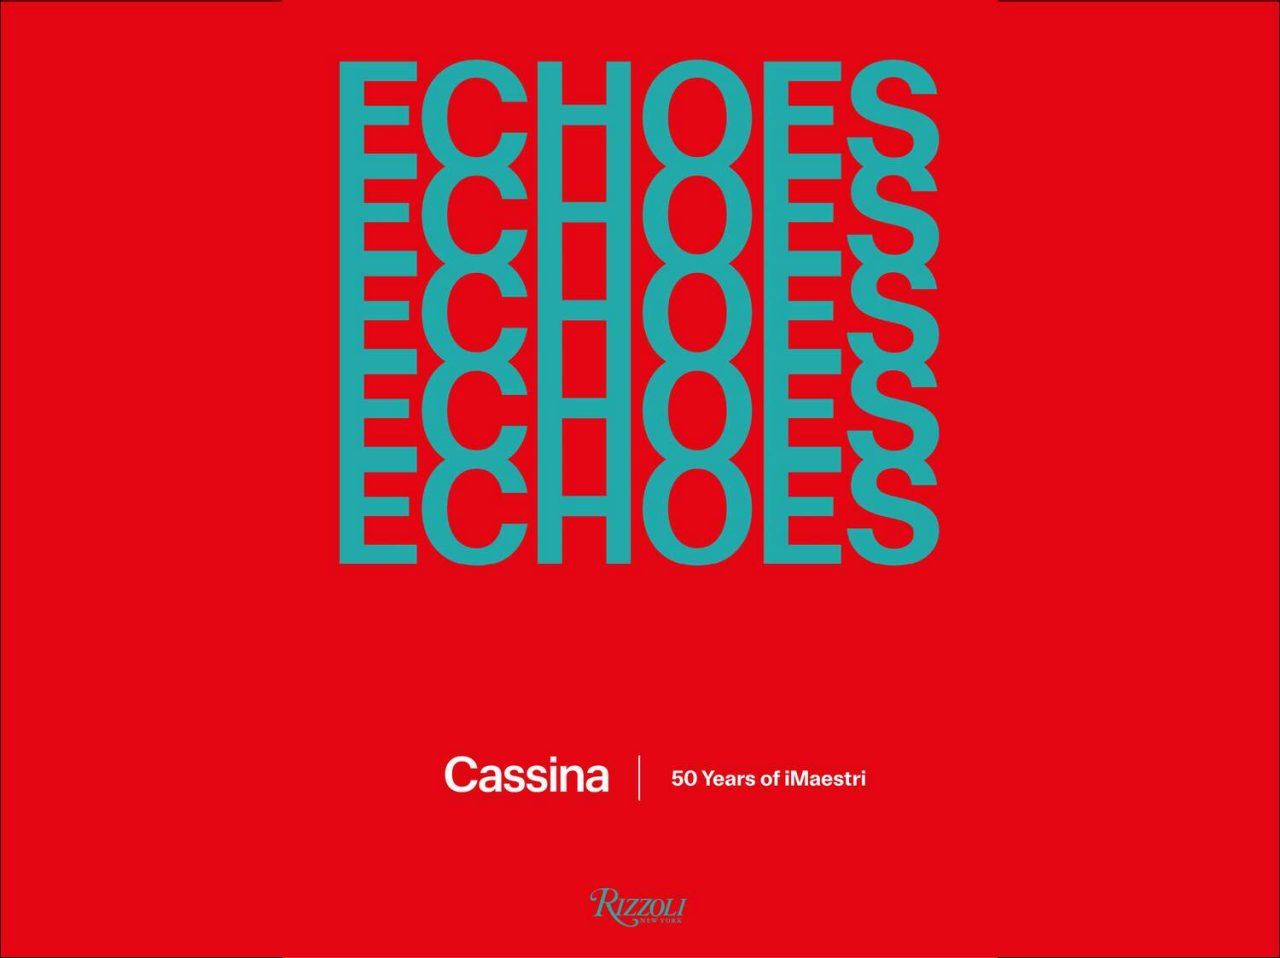 Cover of the ‘Echoes, Cassina. 50 Years of iMaestri’ book